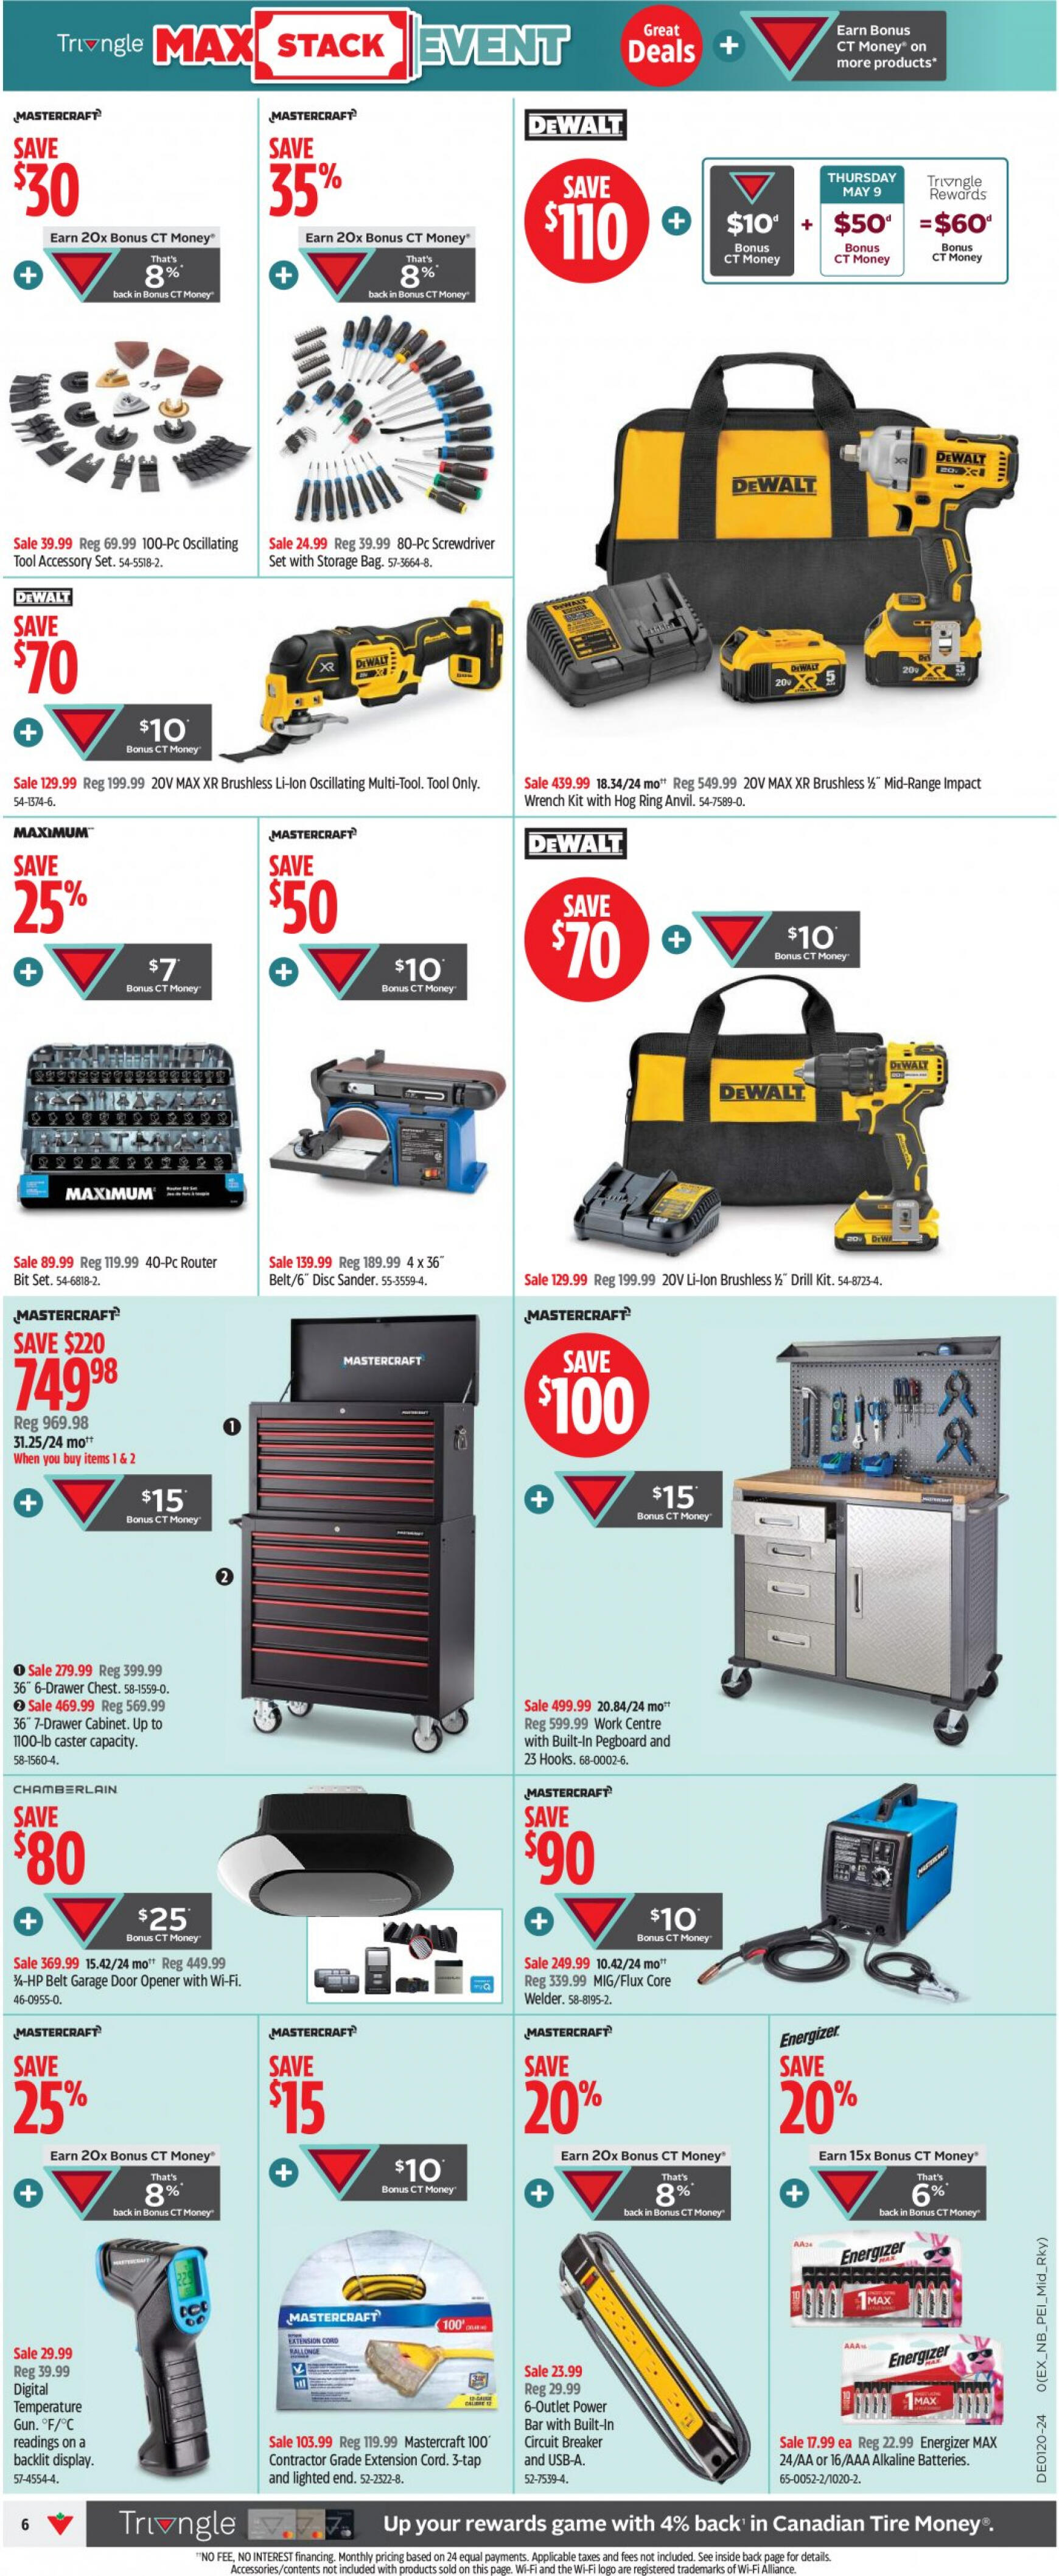 canadian-tire - Canadian Tire flyer current 09.05. - 15.05. - page: 6